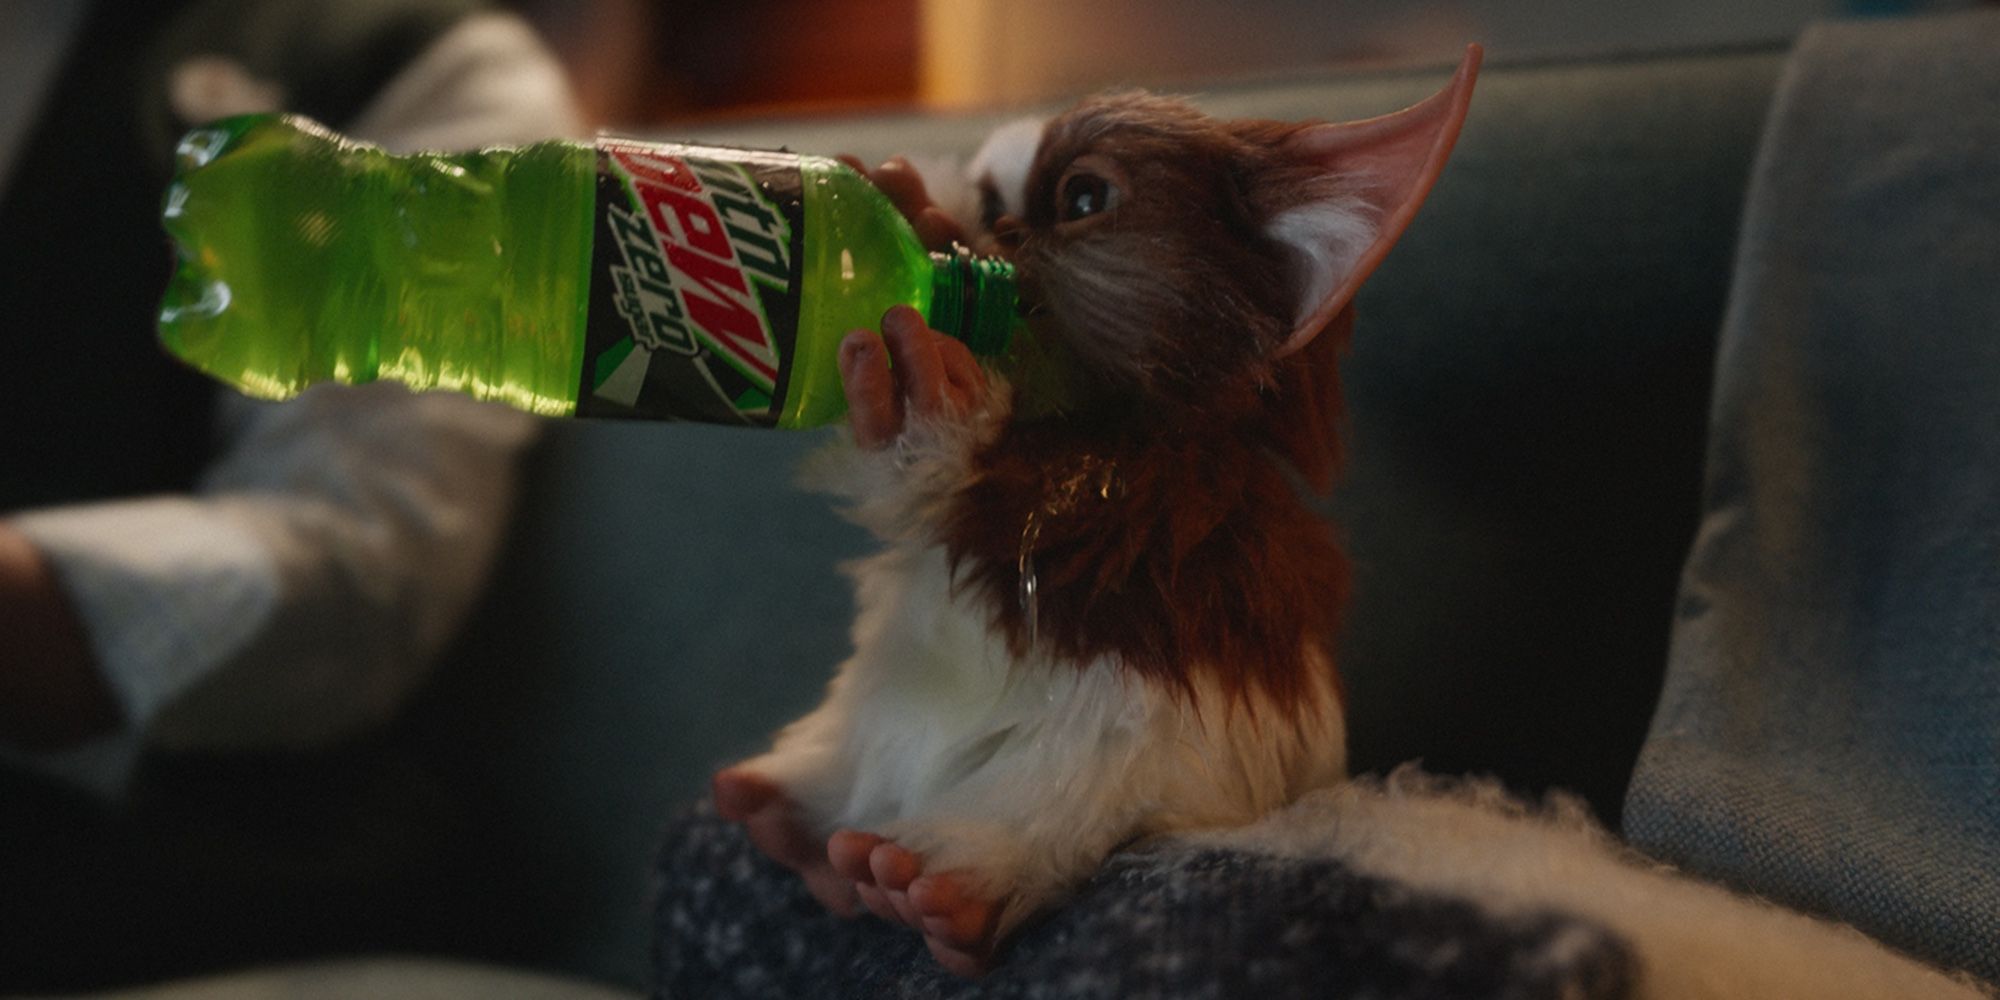 Gizmo Gremlins Mountain Dew commercial